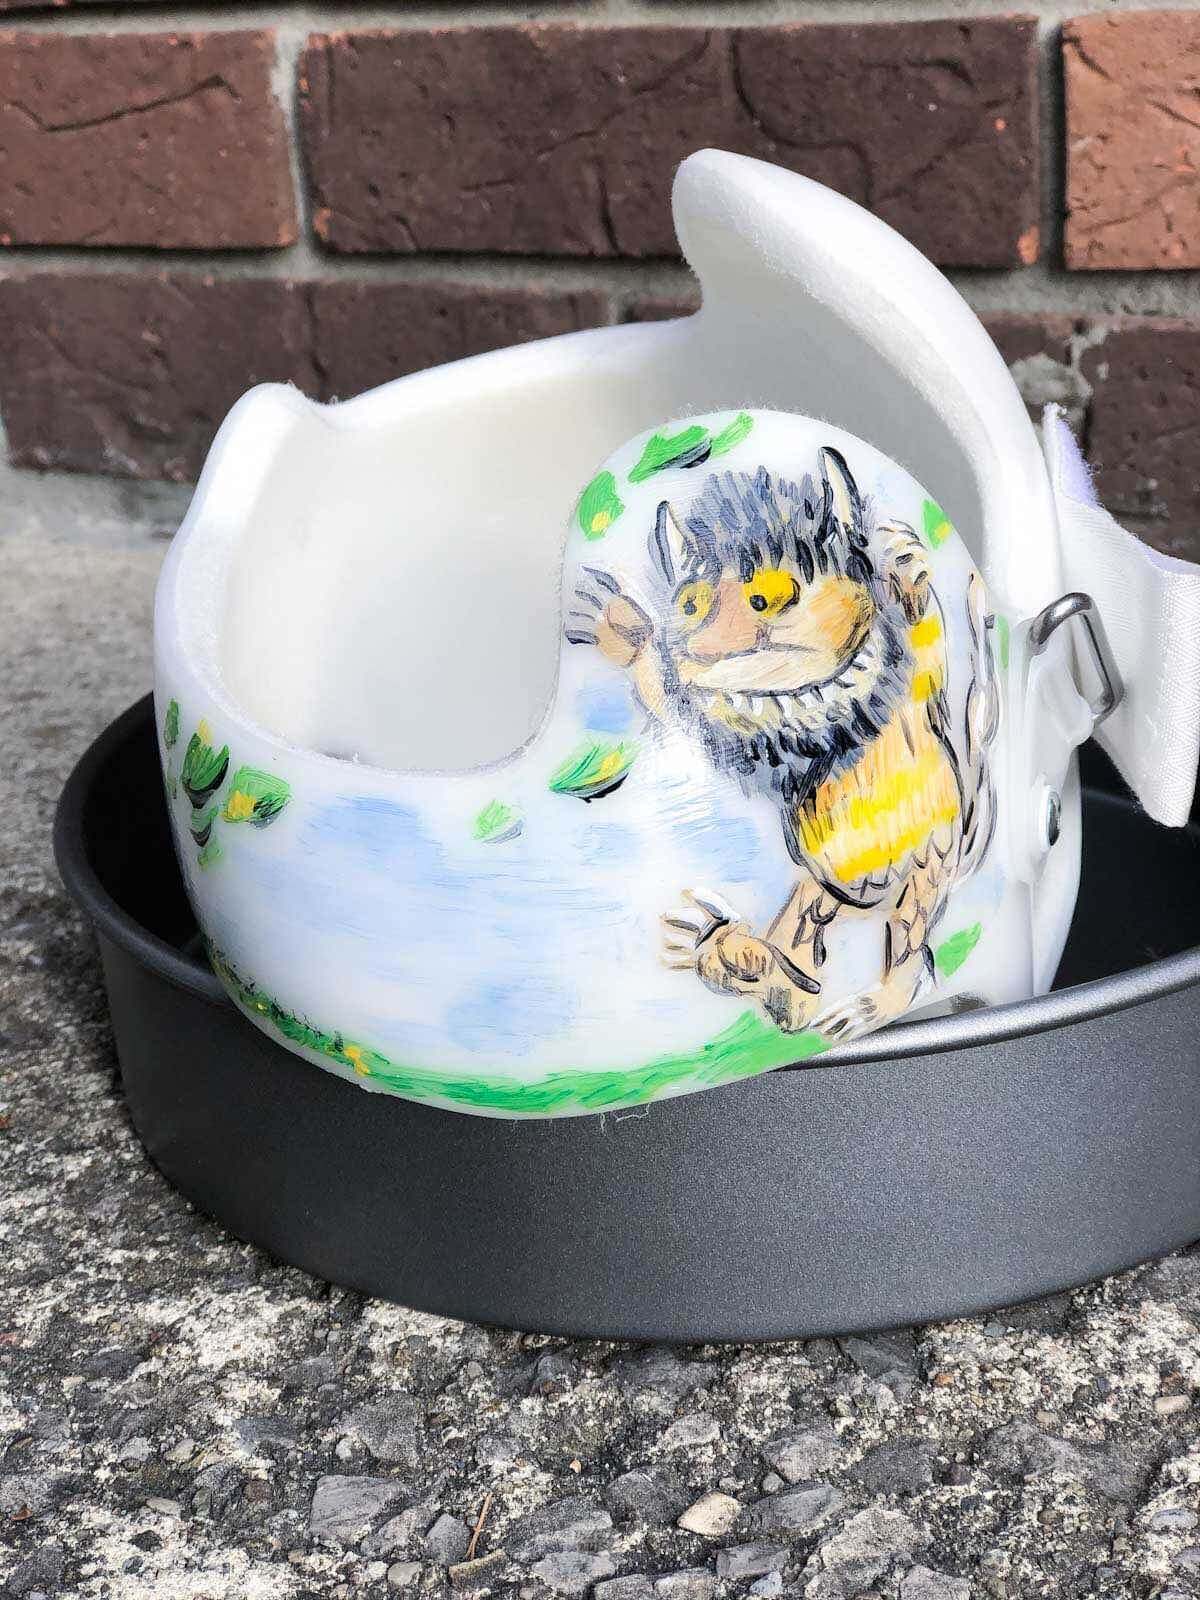 painted baby helmet in baking dish outside drying in the sun.